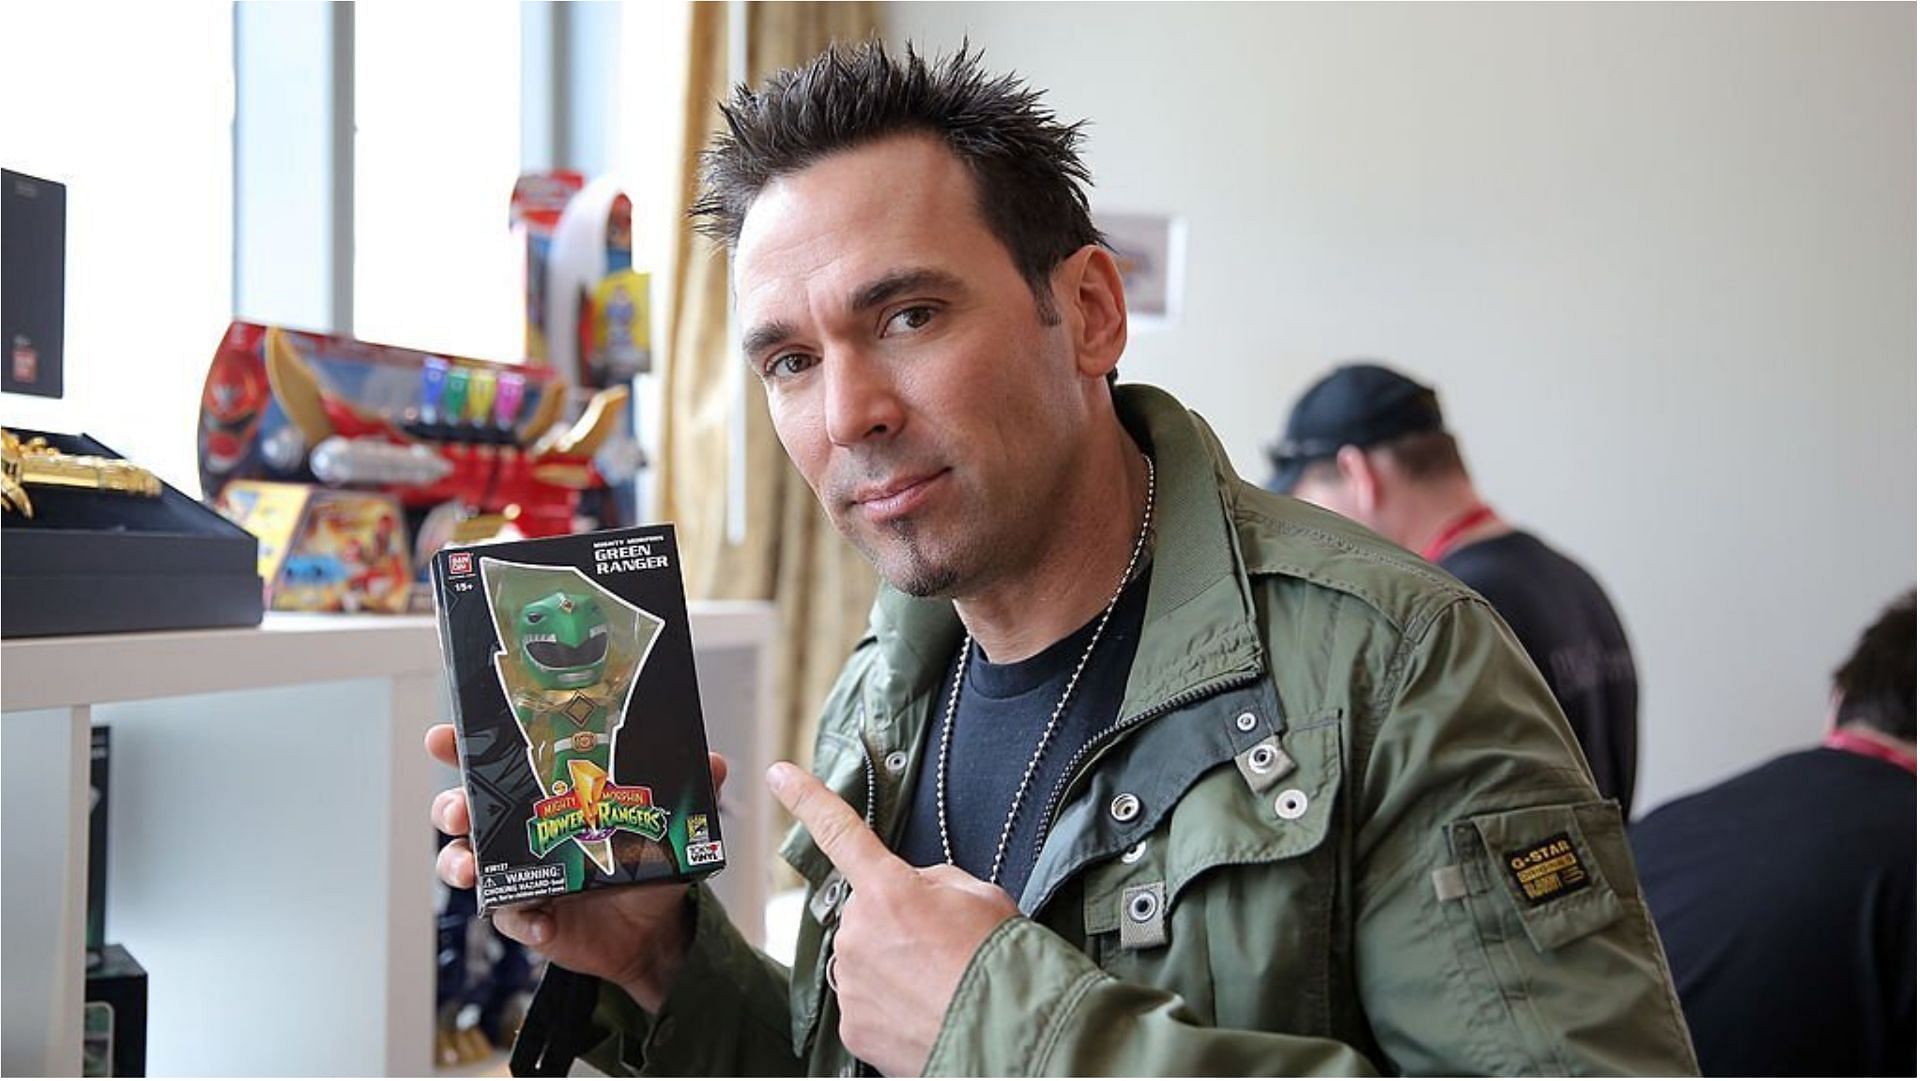 Jason David Frank managed to accumulate a lot of wealth from his appearance in Power Rangers alongside his MMA career (Image via Chelsea Lauren/Getty Images)